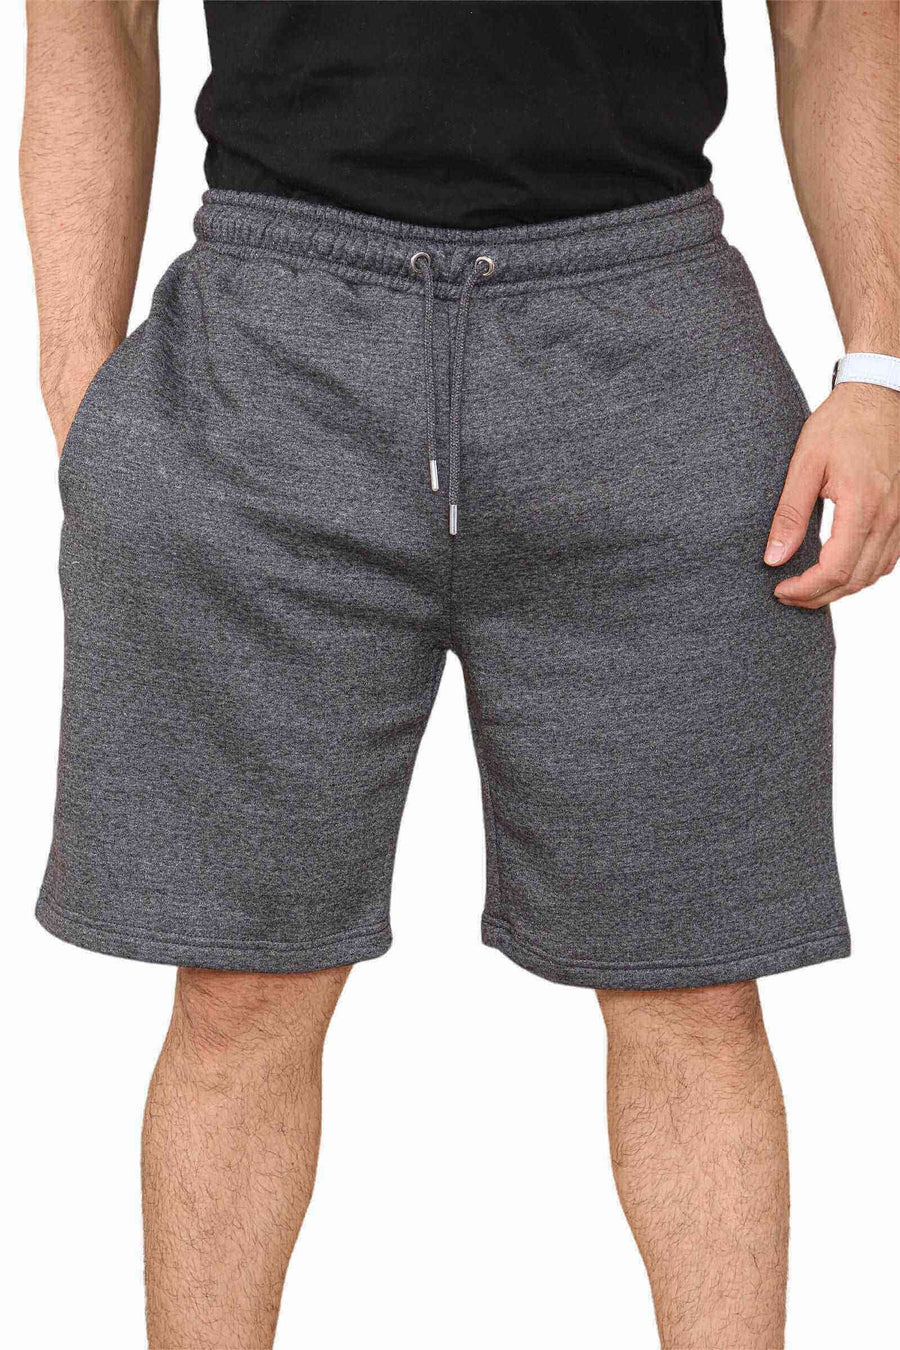 Front View of Men's Gym Shorts in Charcoal for Your Active Lifestyle